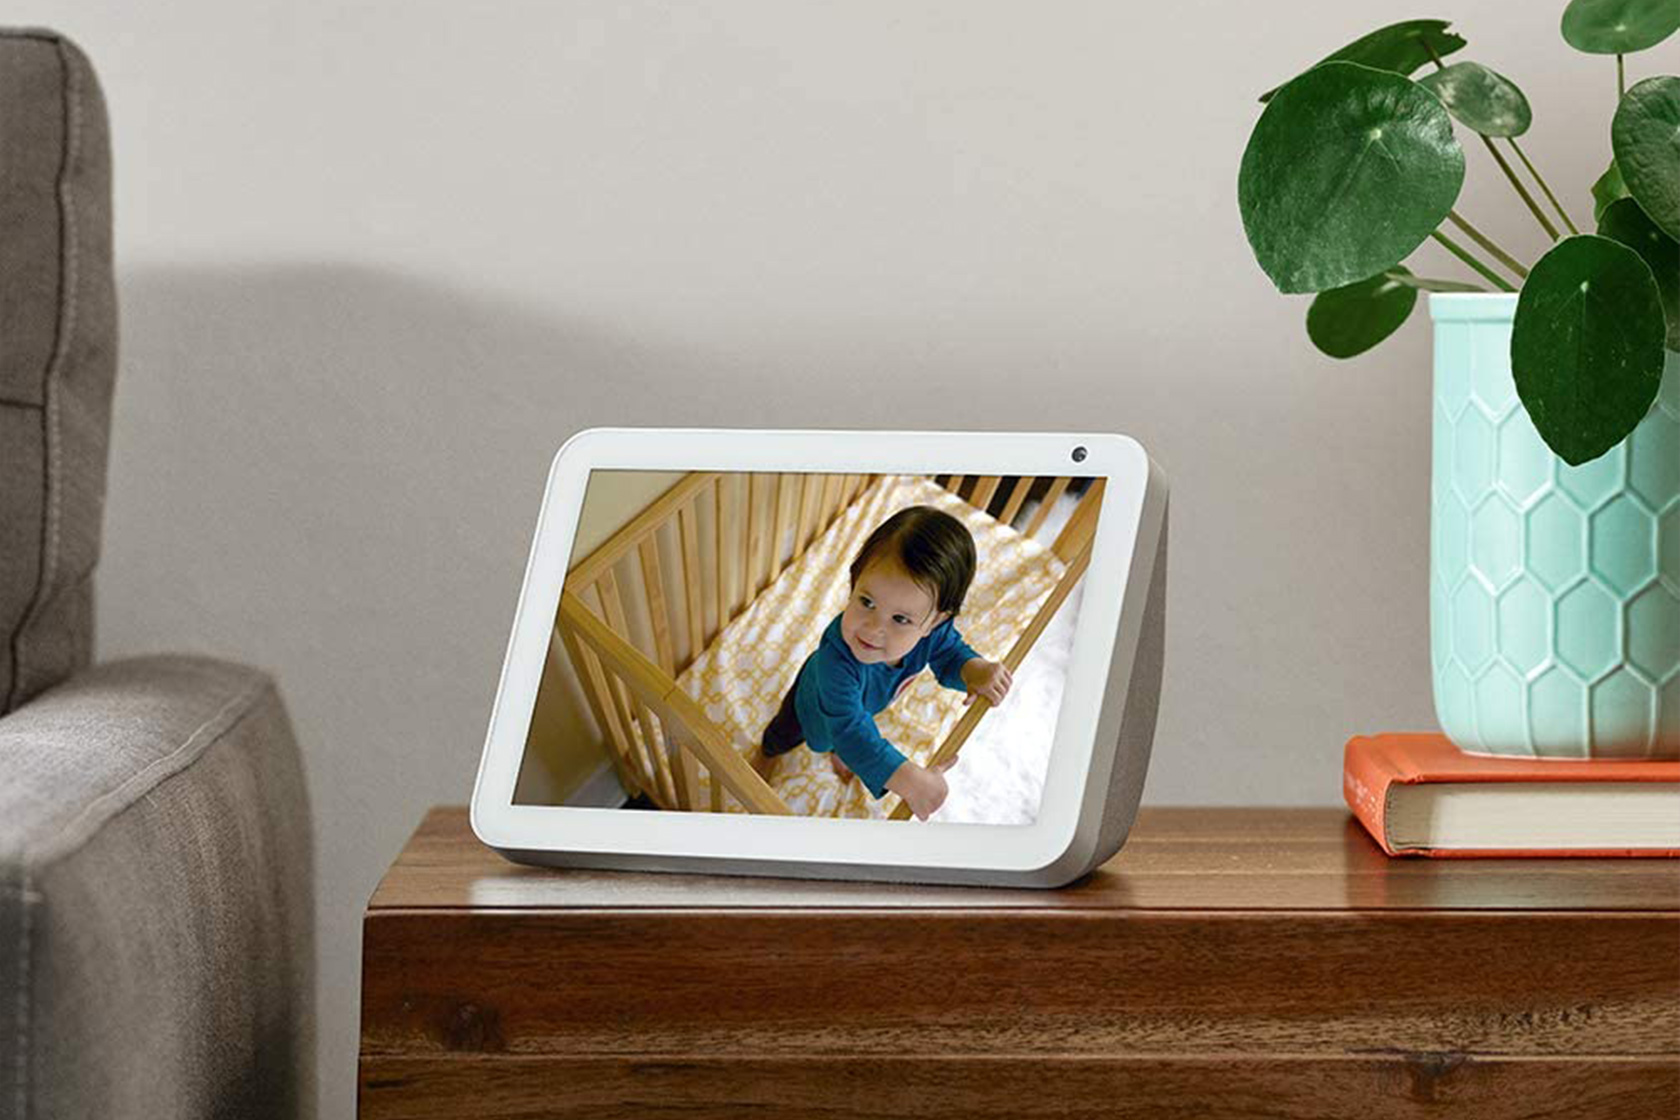 Transform your living space into a smart home with this half-off Echo Show 8